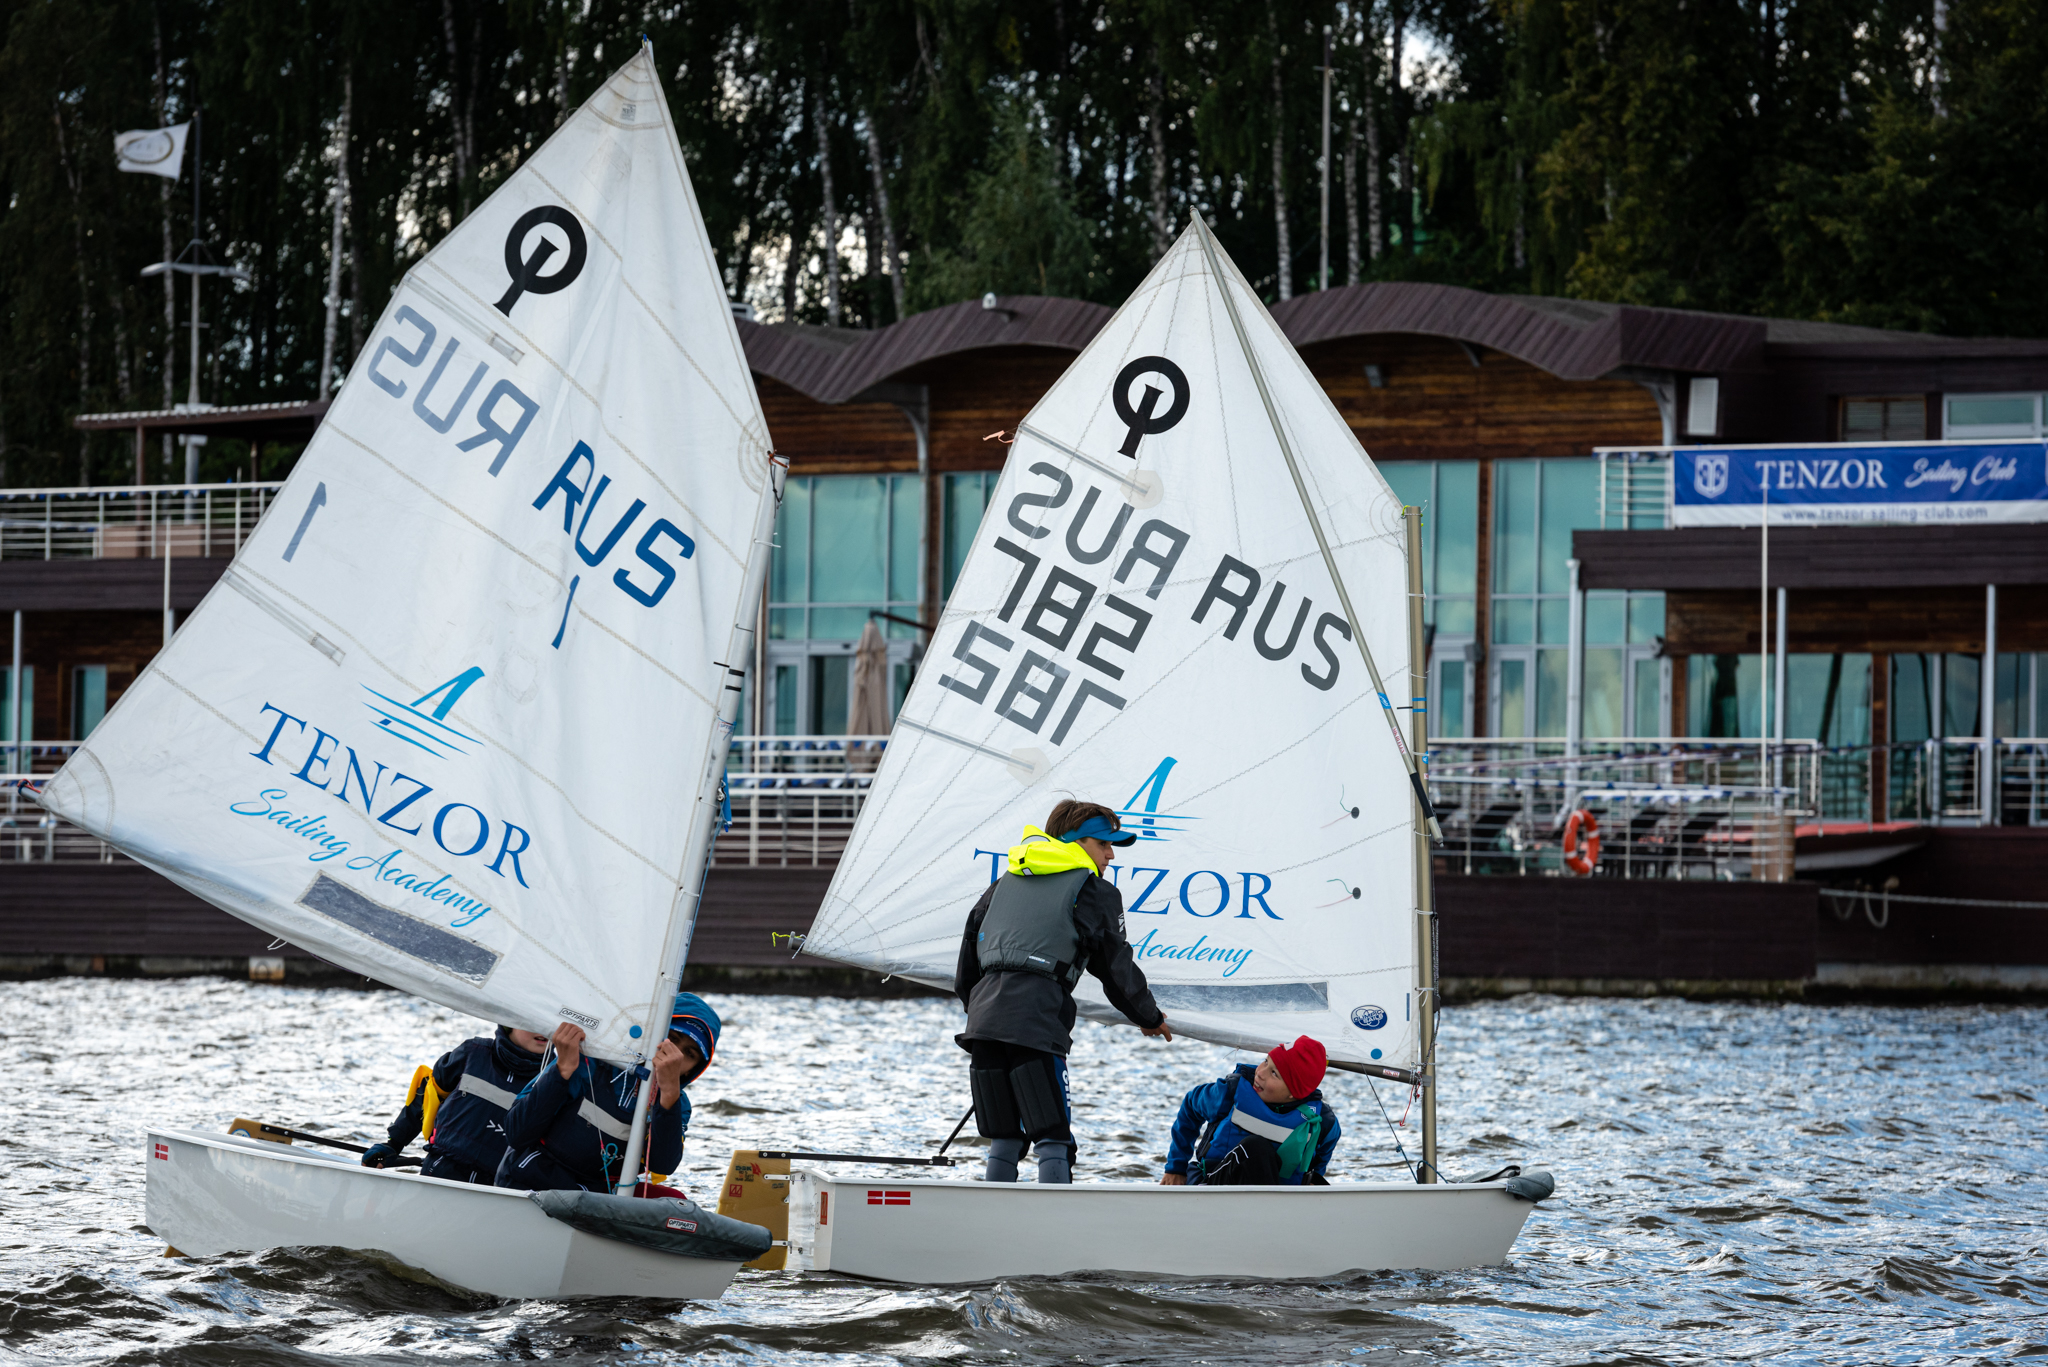 A new spot of Tenzor Sailing Club in SberCity in Rublevo-Arkhangelskoe will be launched this summer